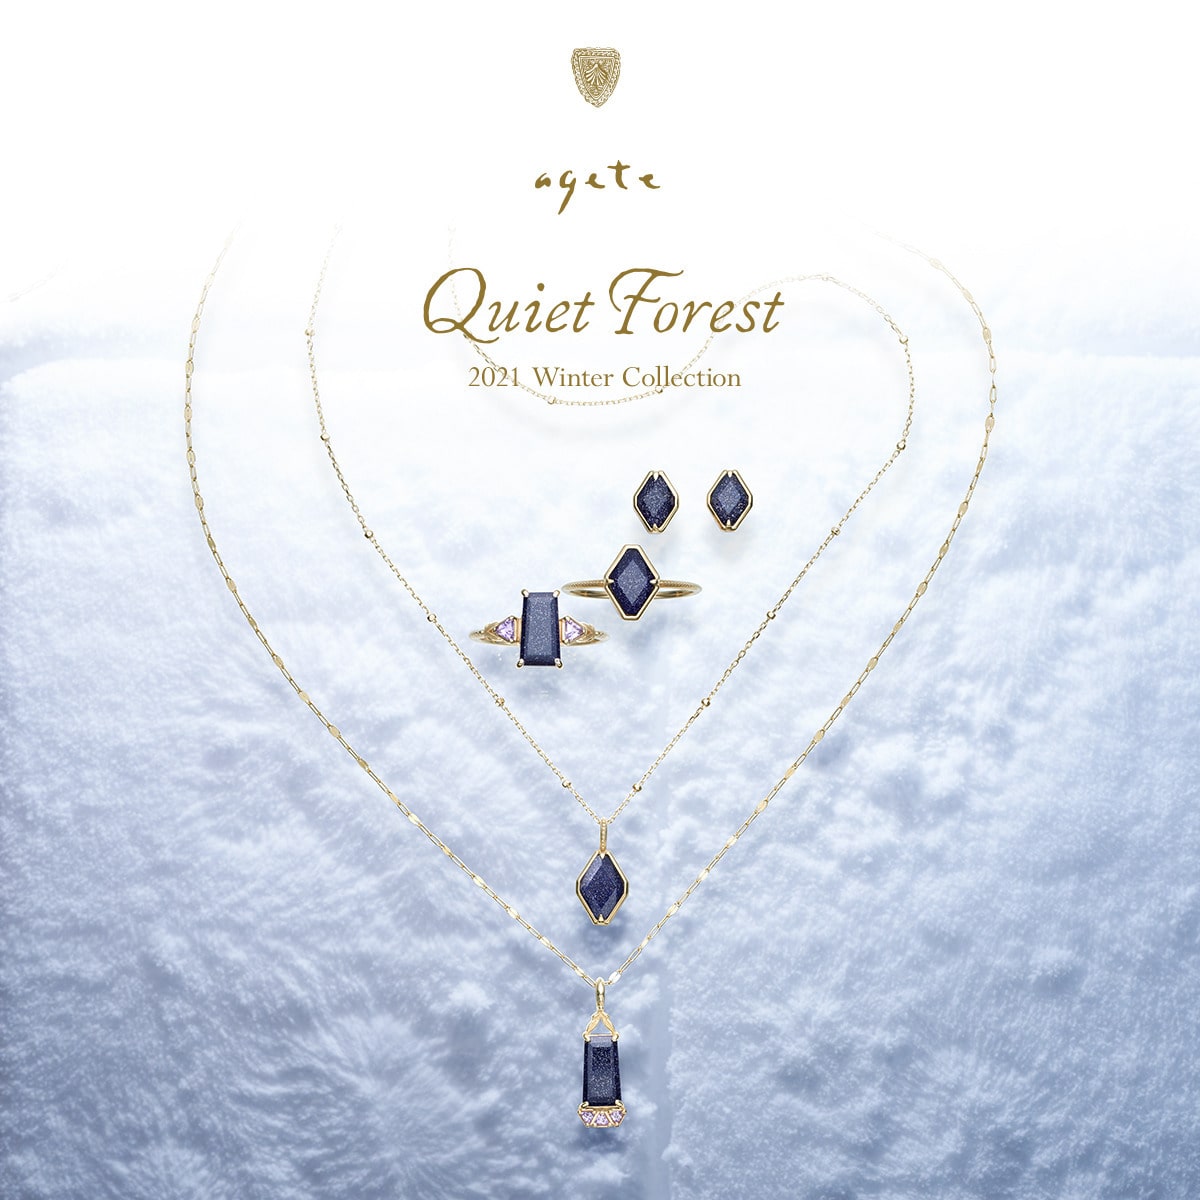 2021 Winter Collection Quiet Forest